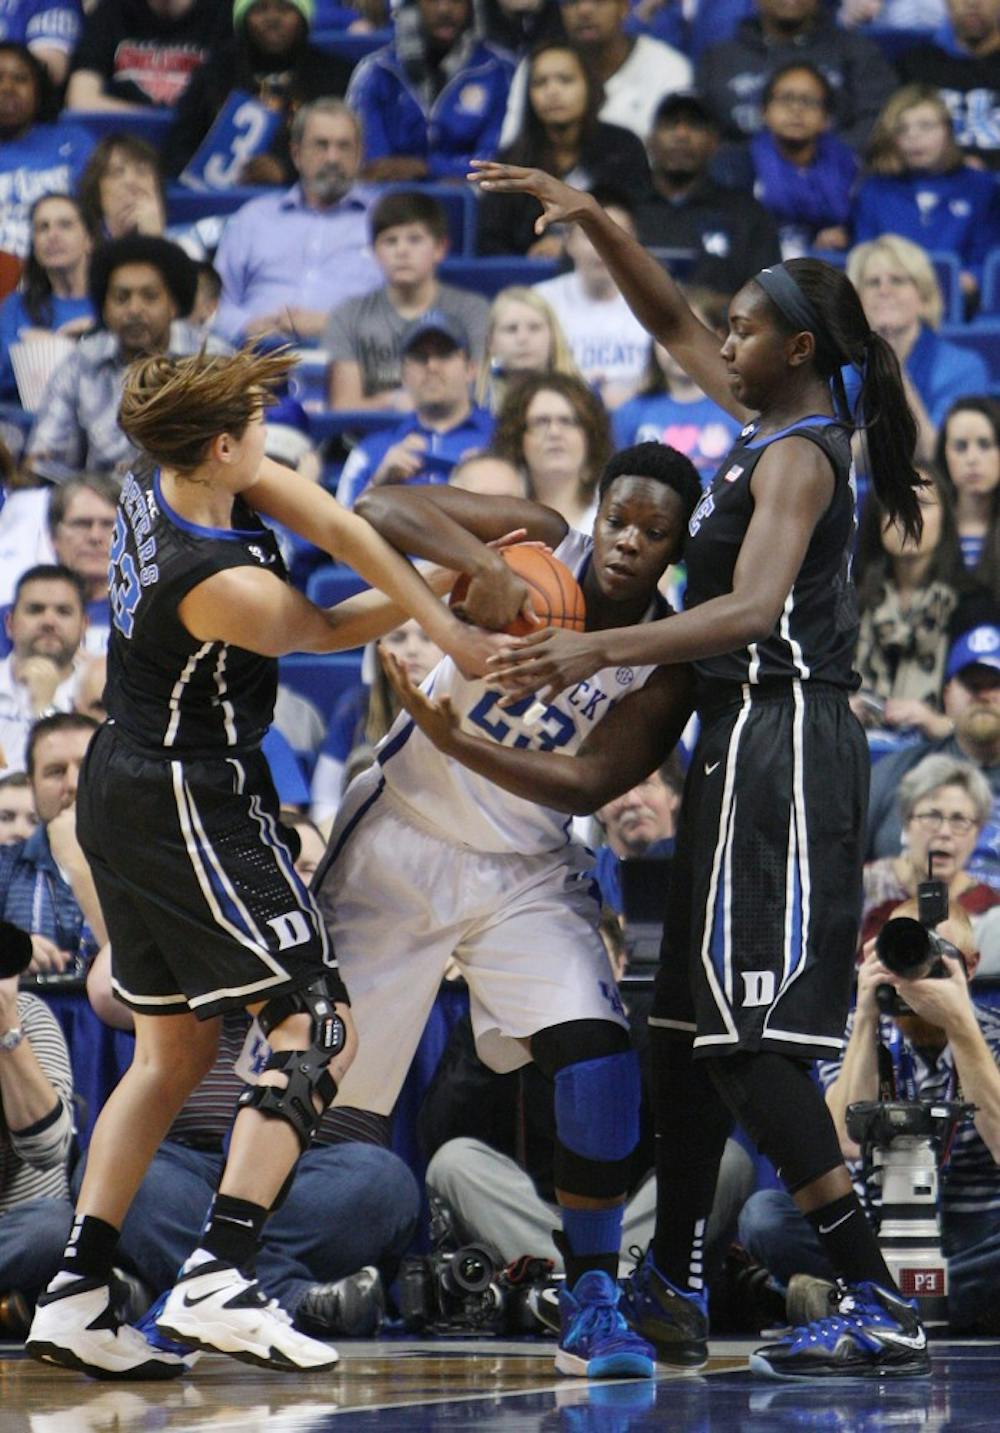 Duke forward Haley Peters (33) and center Elizabeth Williams (1) fight for the ball with UK forward Samarie Walker (23) during UK Hoops vs. Duke at Rupp Arena in Lexington, Ky., on Sunday, December 22, 2013. Photo by Emily Wuetcher | Staff 